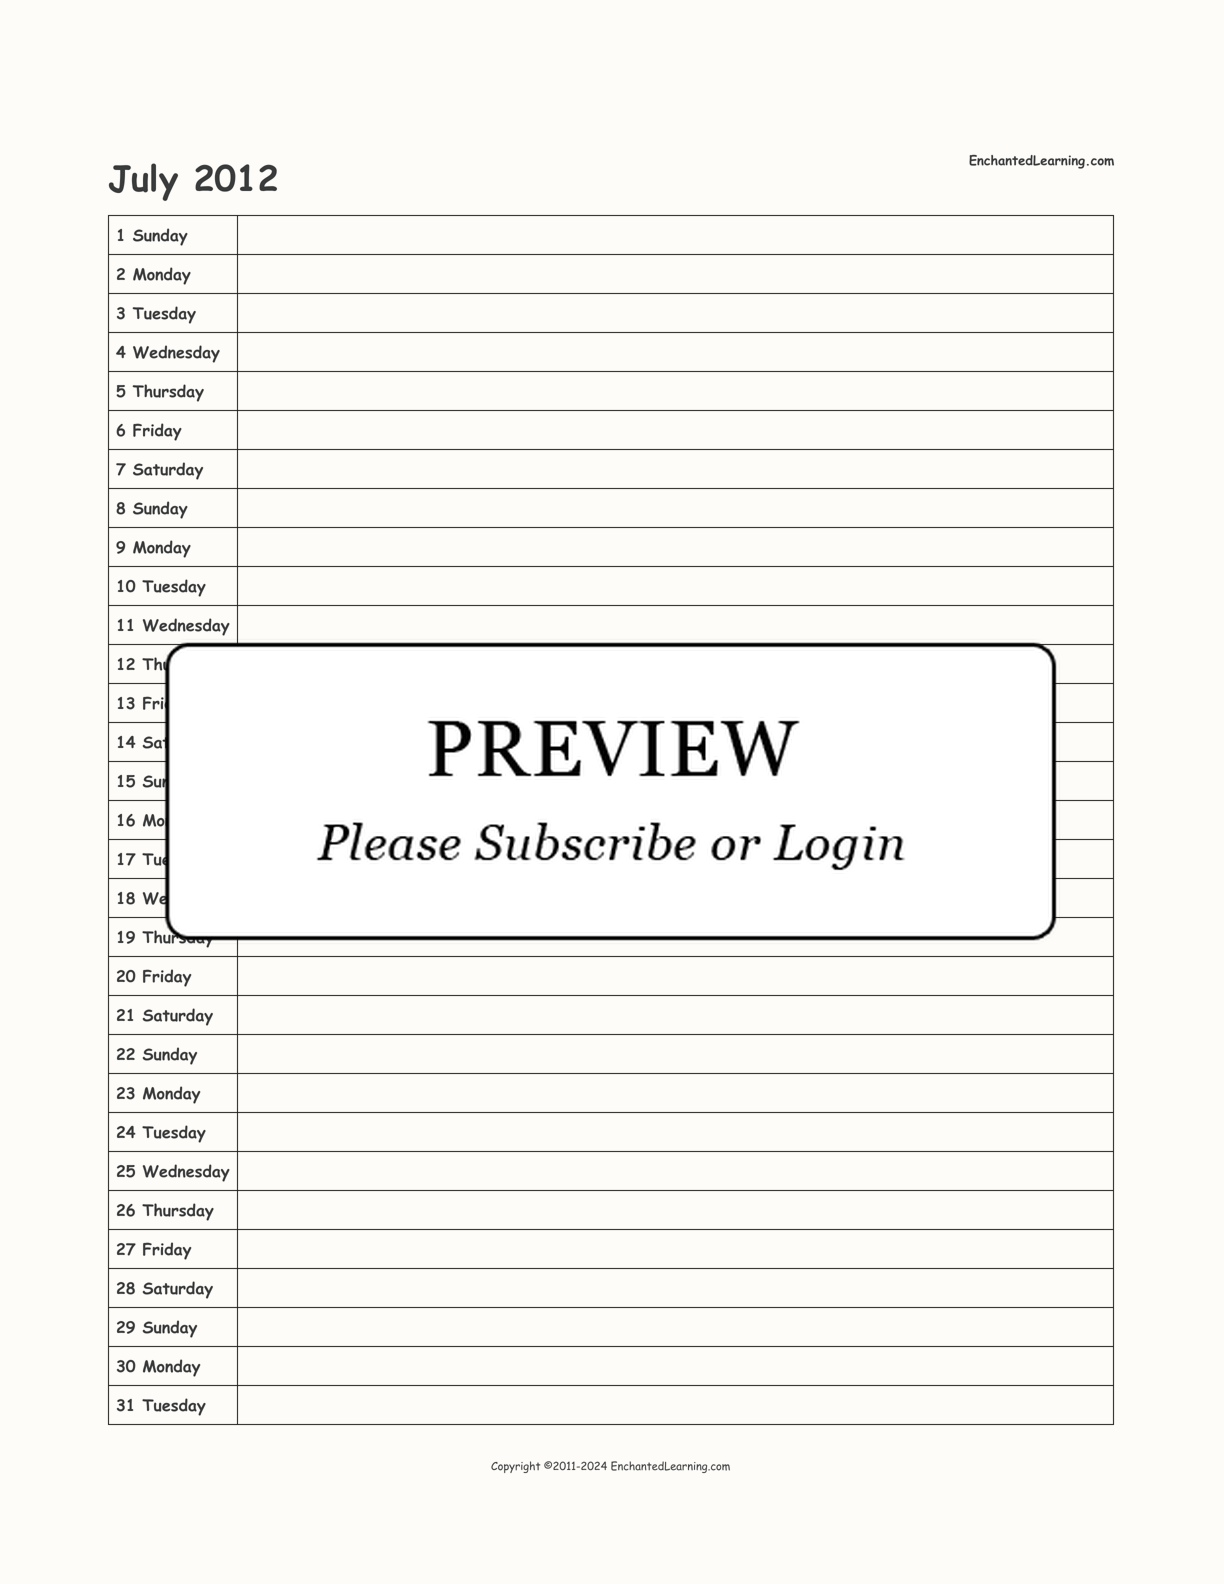 2012 Scheduling Calendar interactive printout page 7